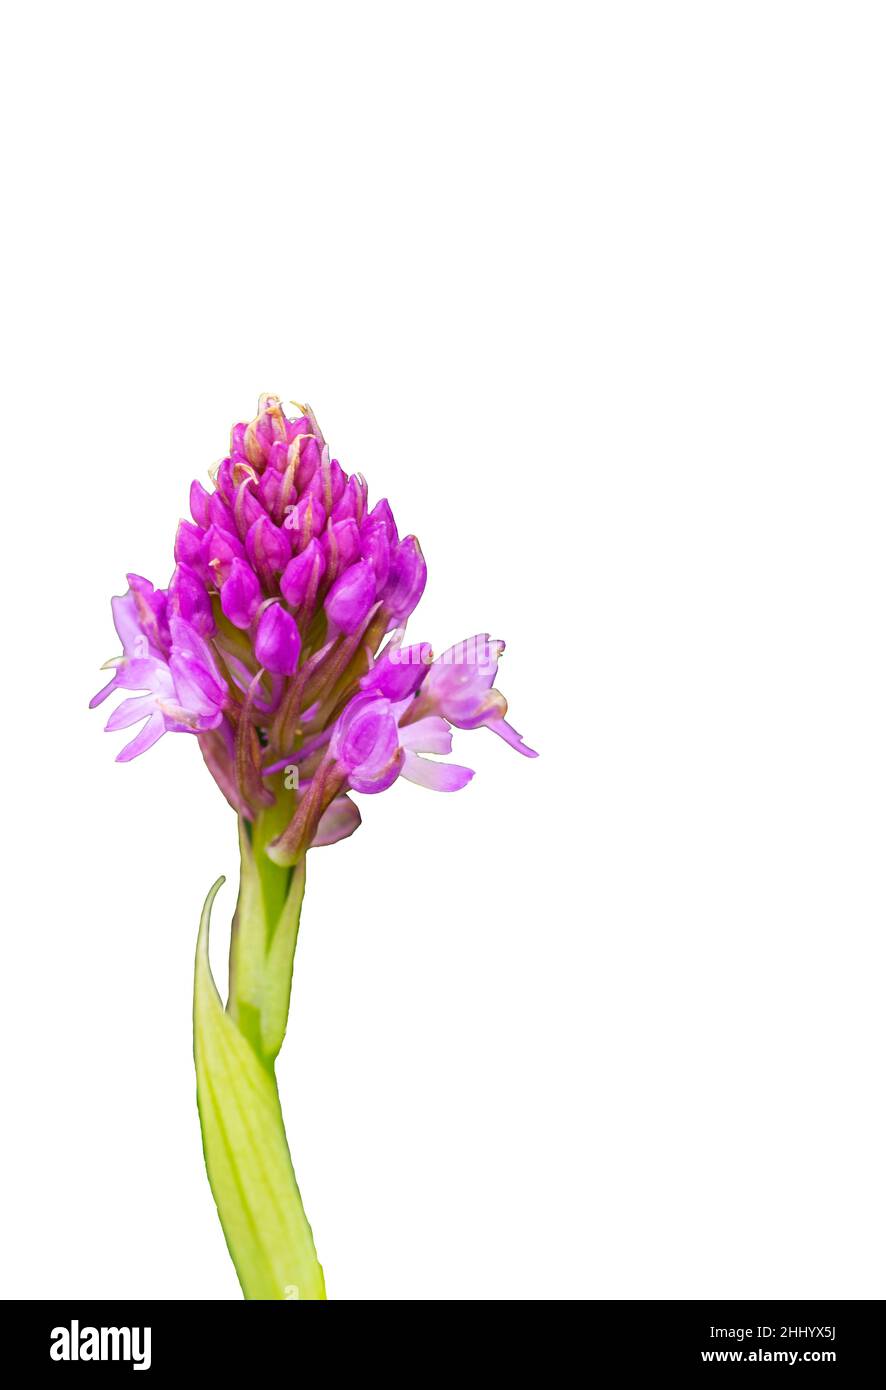 A pink Pyramidal Orchid in isolation on a white background Stock Photo